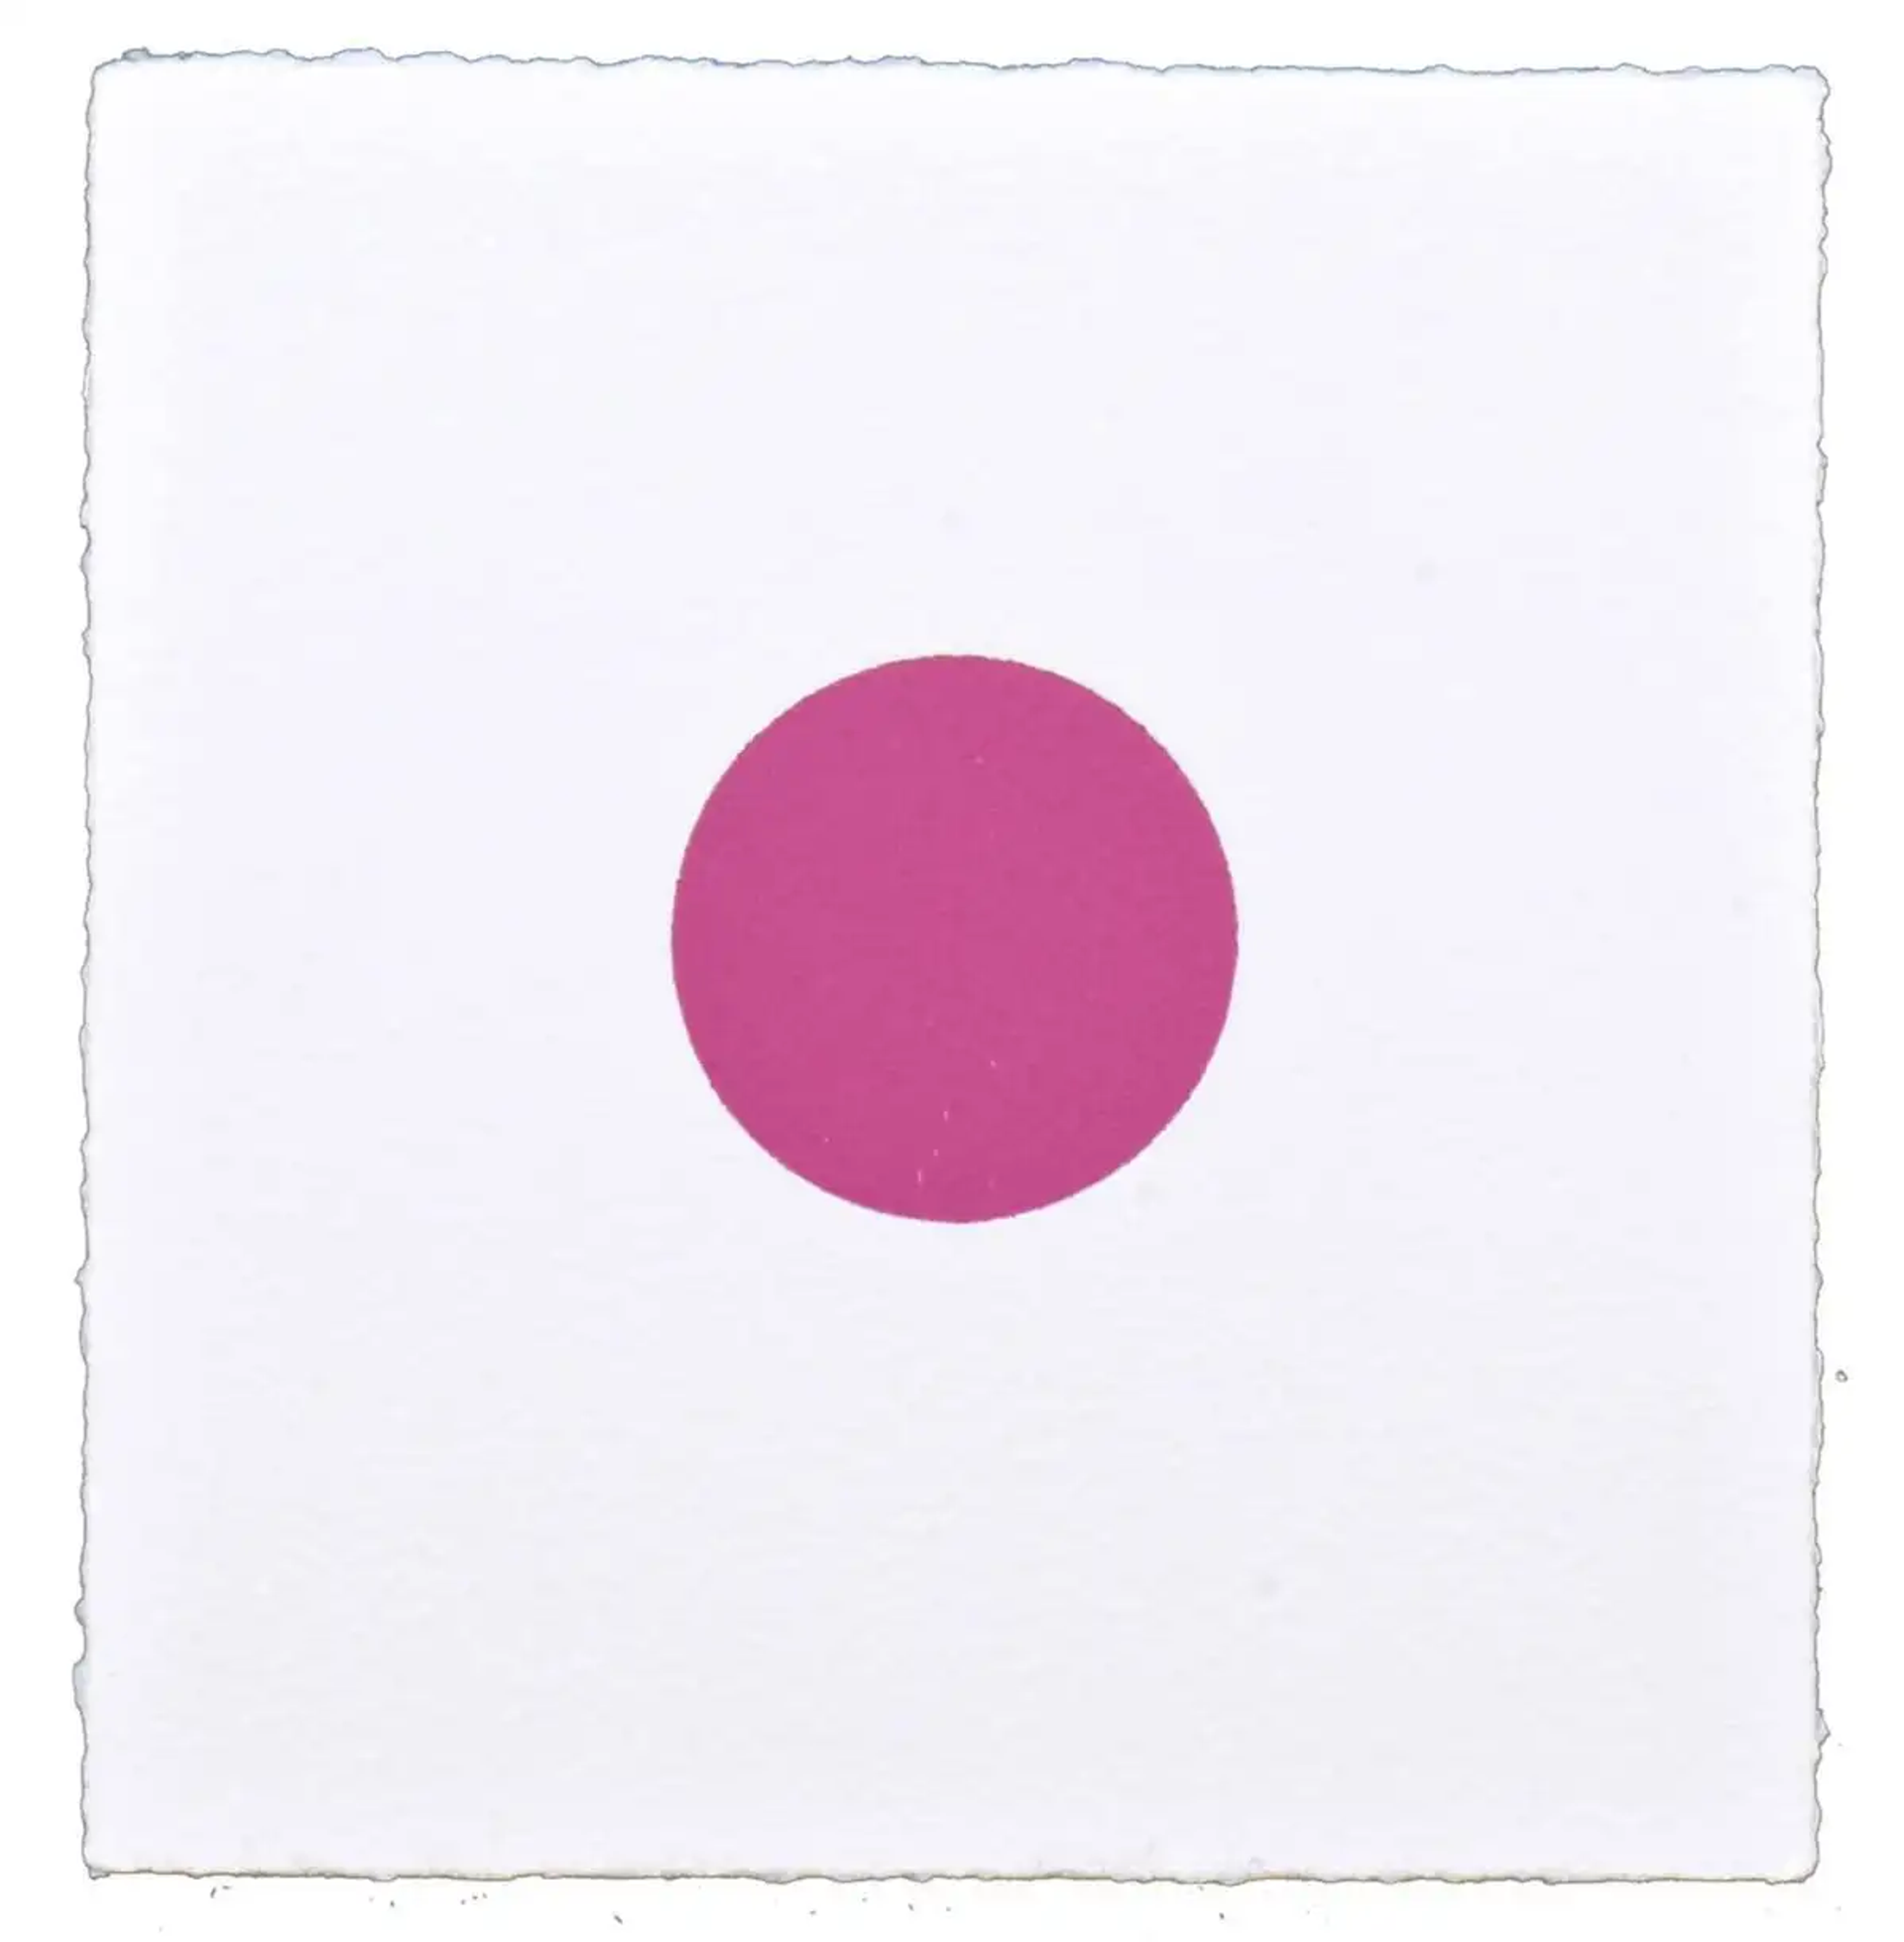 A pink circle in the centre of a canvas, against a white background.